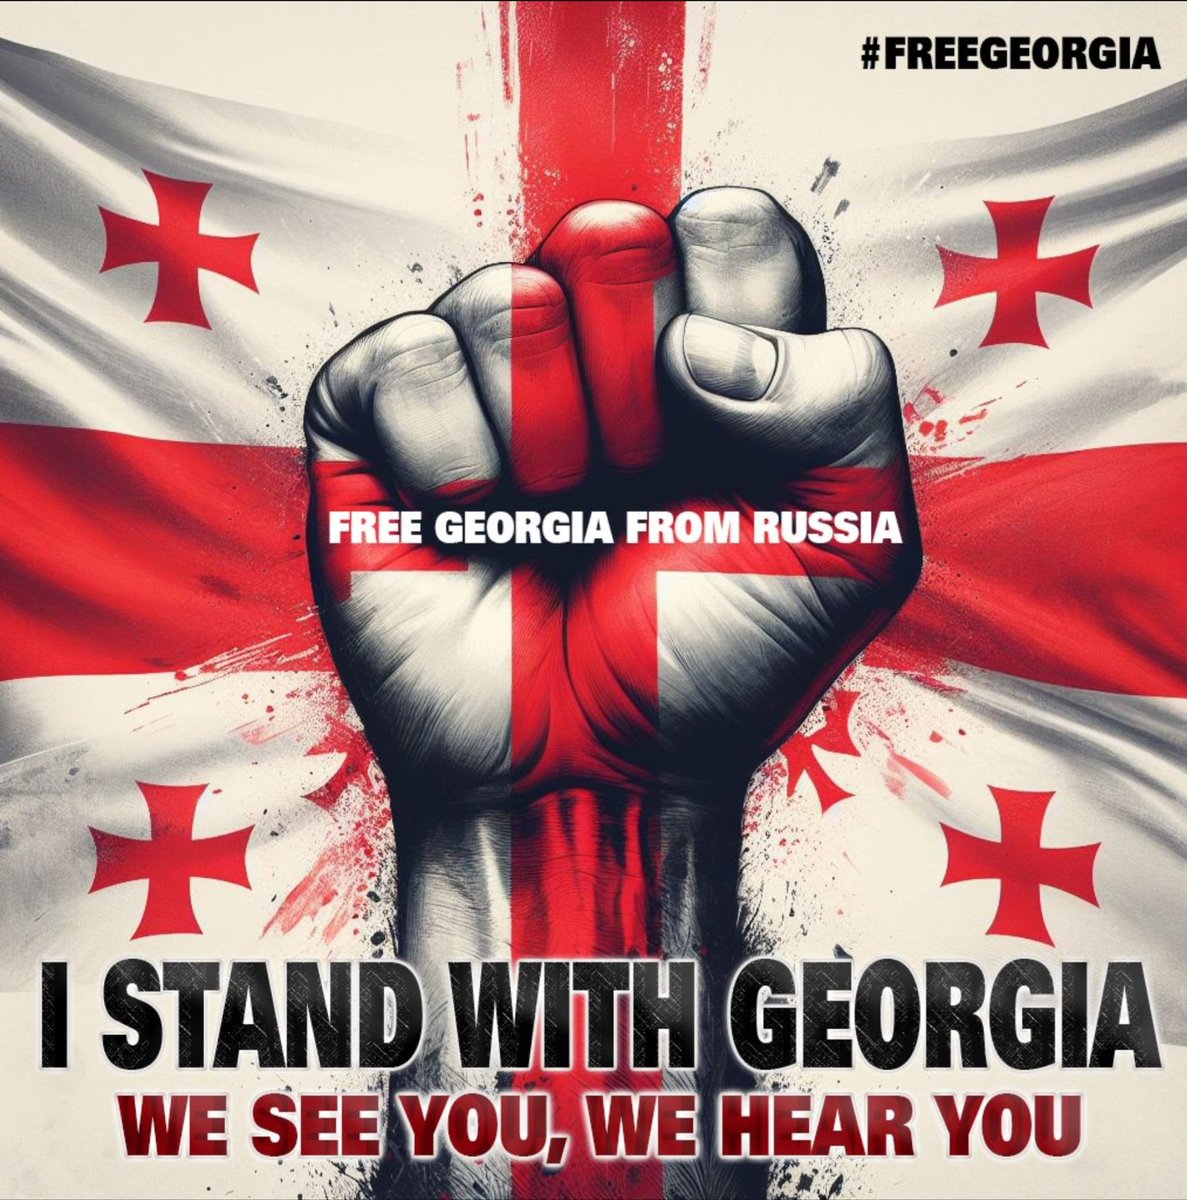 Georgia 🇬🇪 is not negotiable!